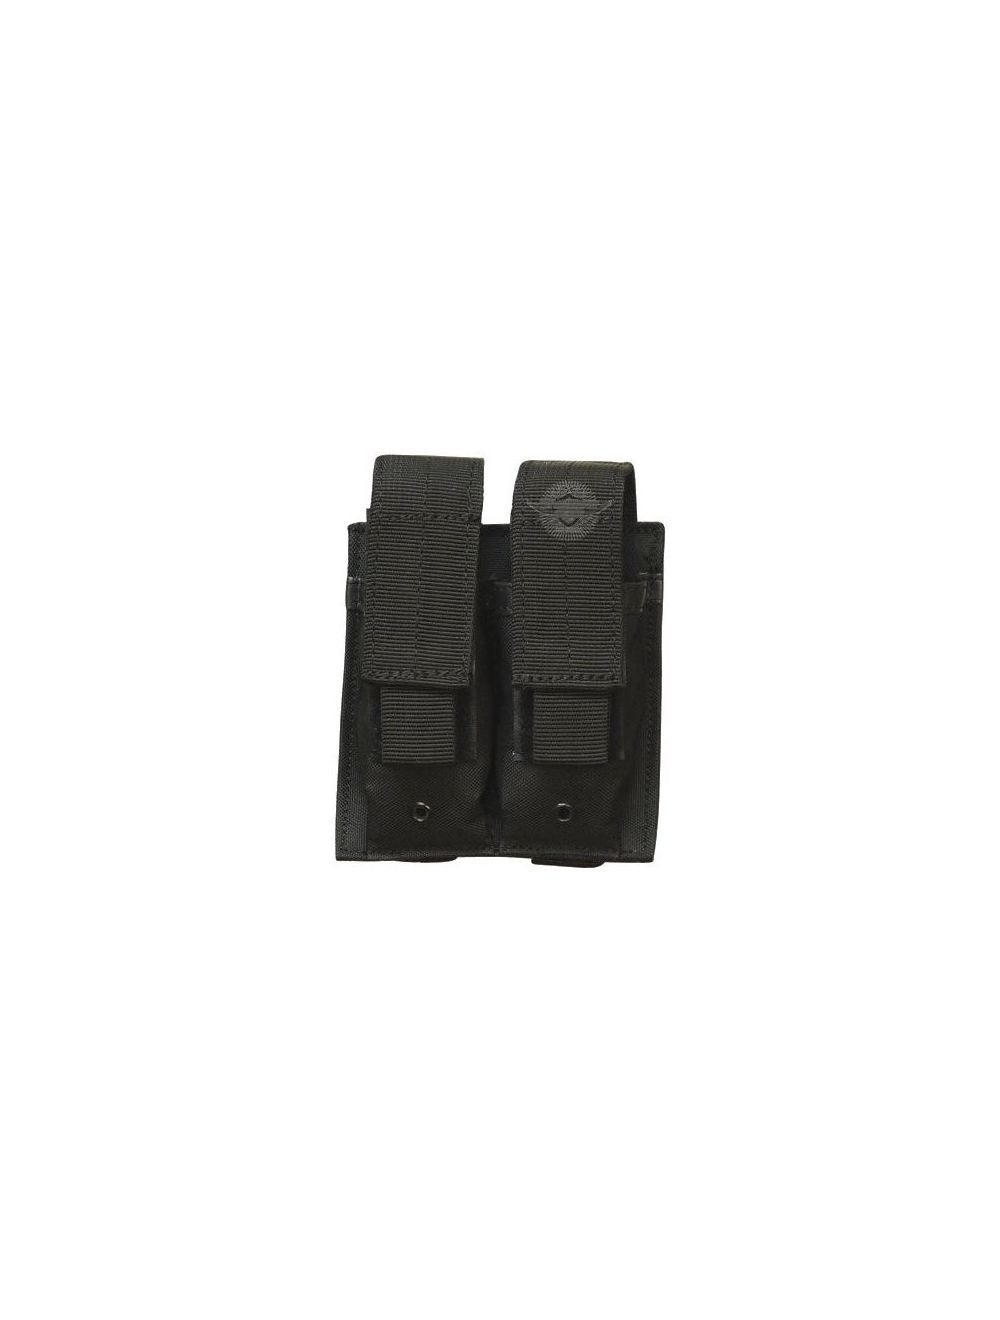 MPD-5S Double Pistol Mag Pouch